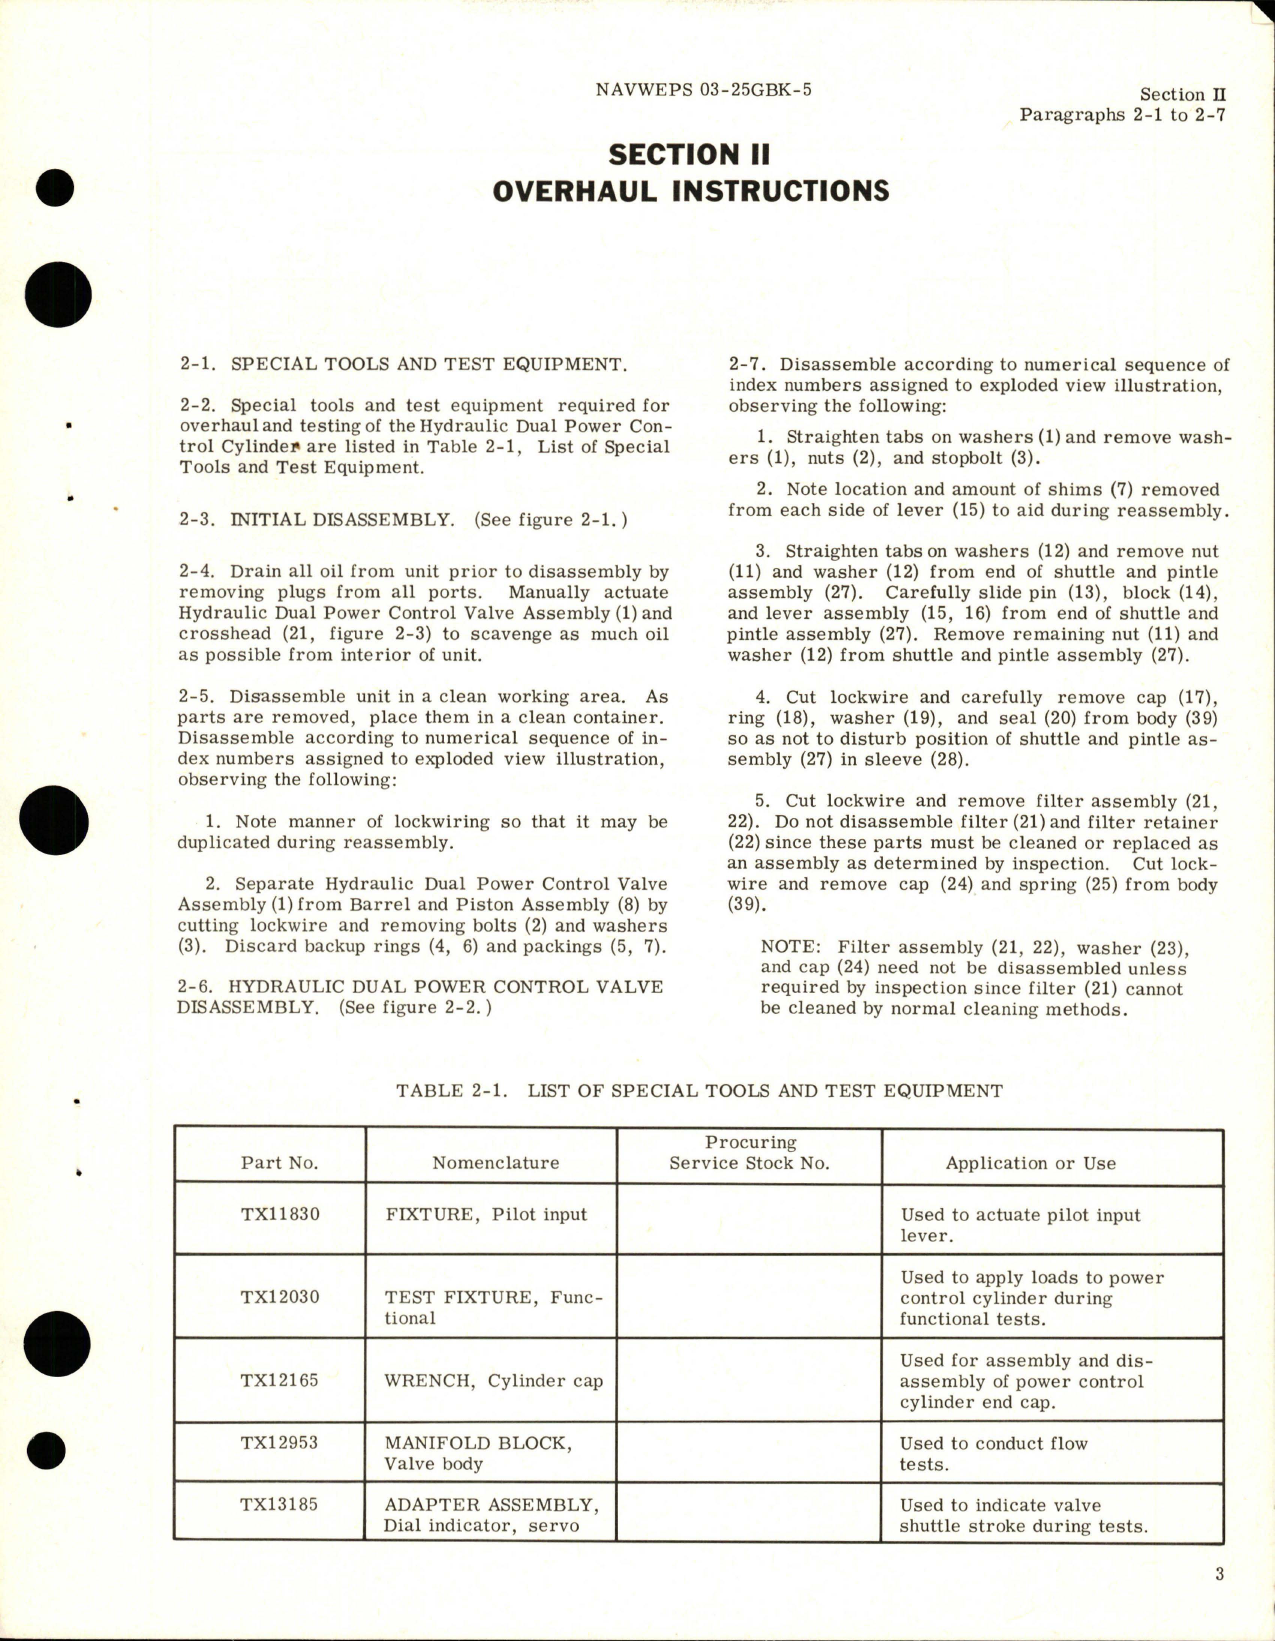 Sample page 7 from AirCorps Library document: Overhaul Instructions for Hydraulic Dual Power Control Cylinder - Parts 16560, 16560-1, 16545, 16563, and 16563-1